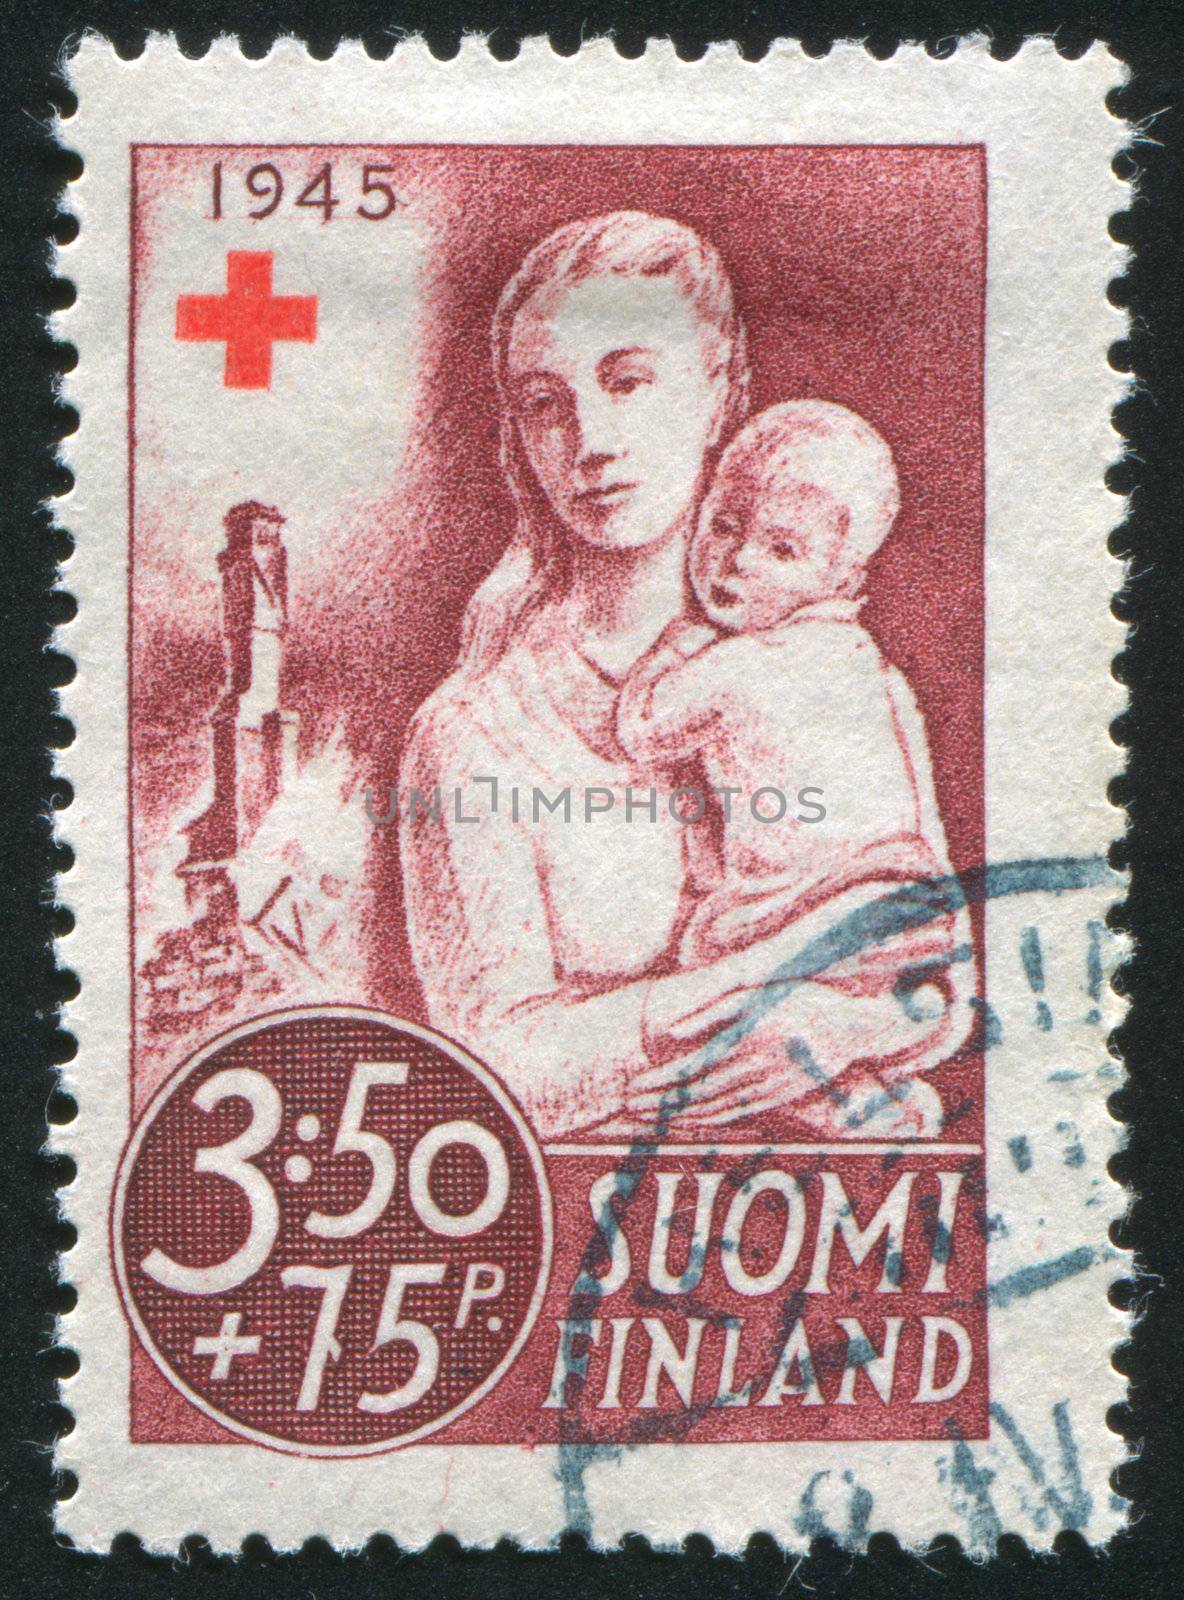 FINLAND - CIRCA 1945: stamp printed by Finland, shows Mother with Child, circa 1945